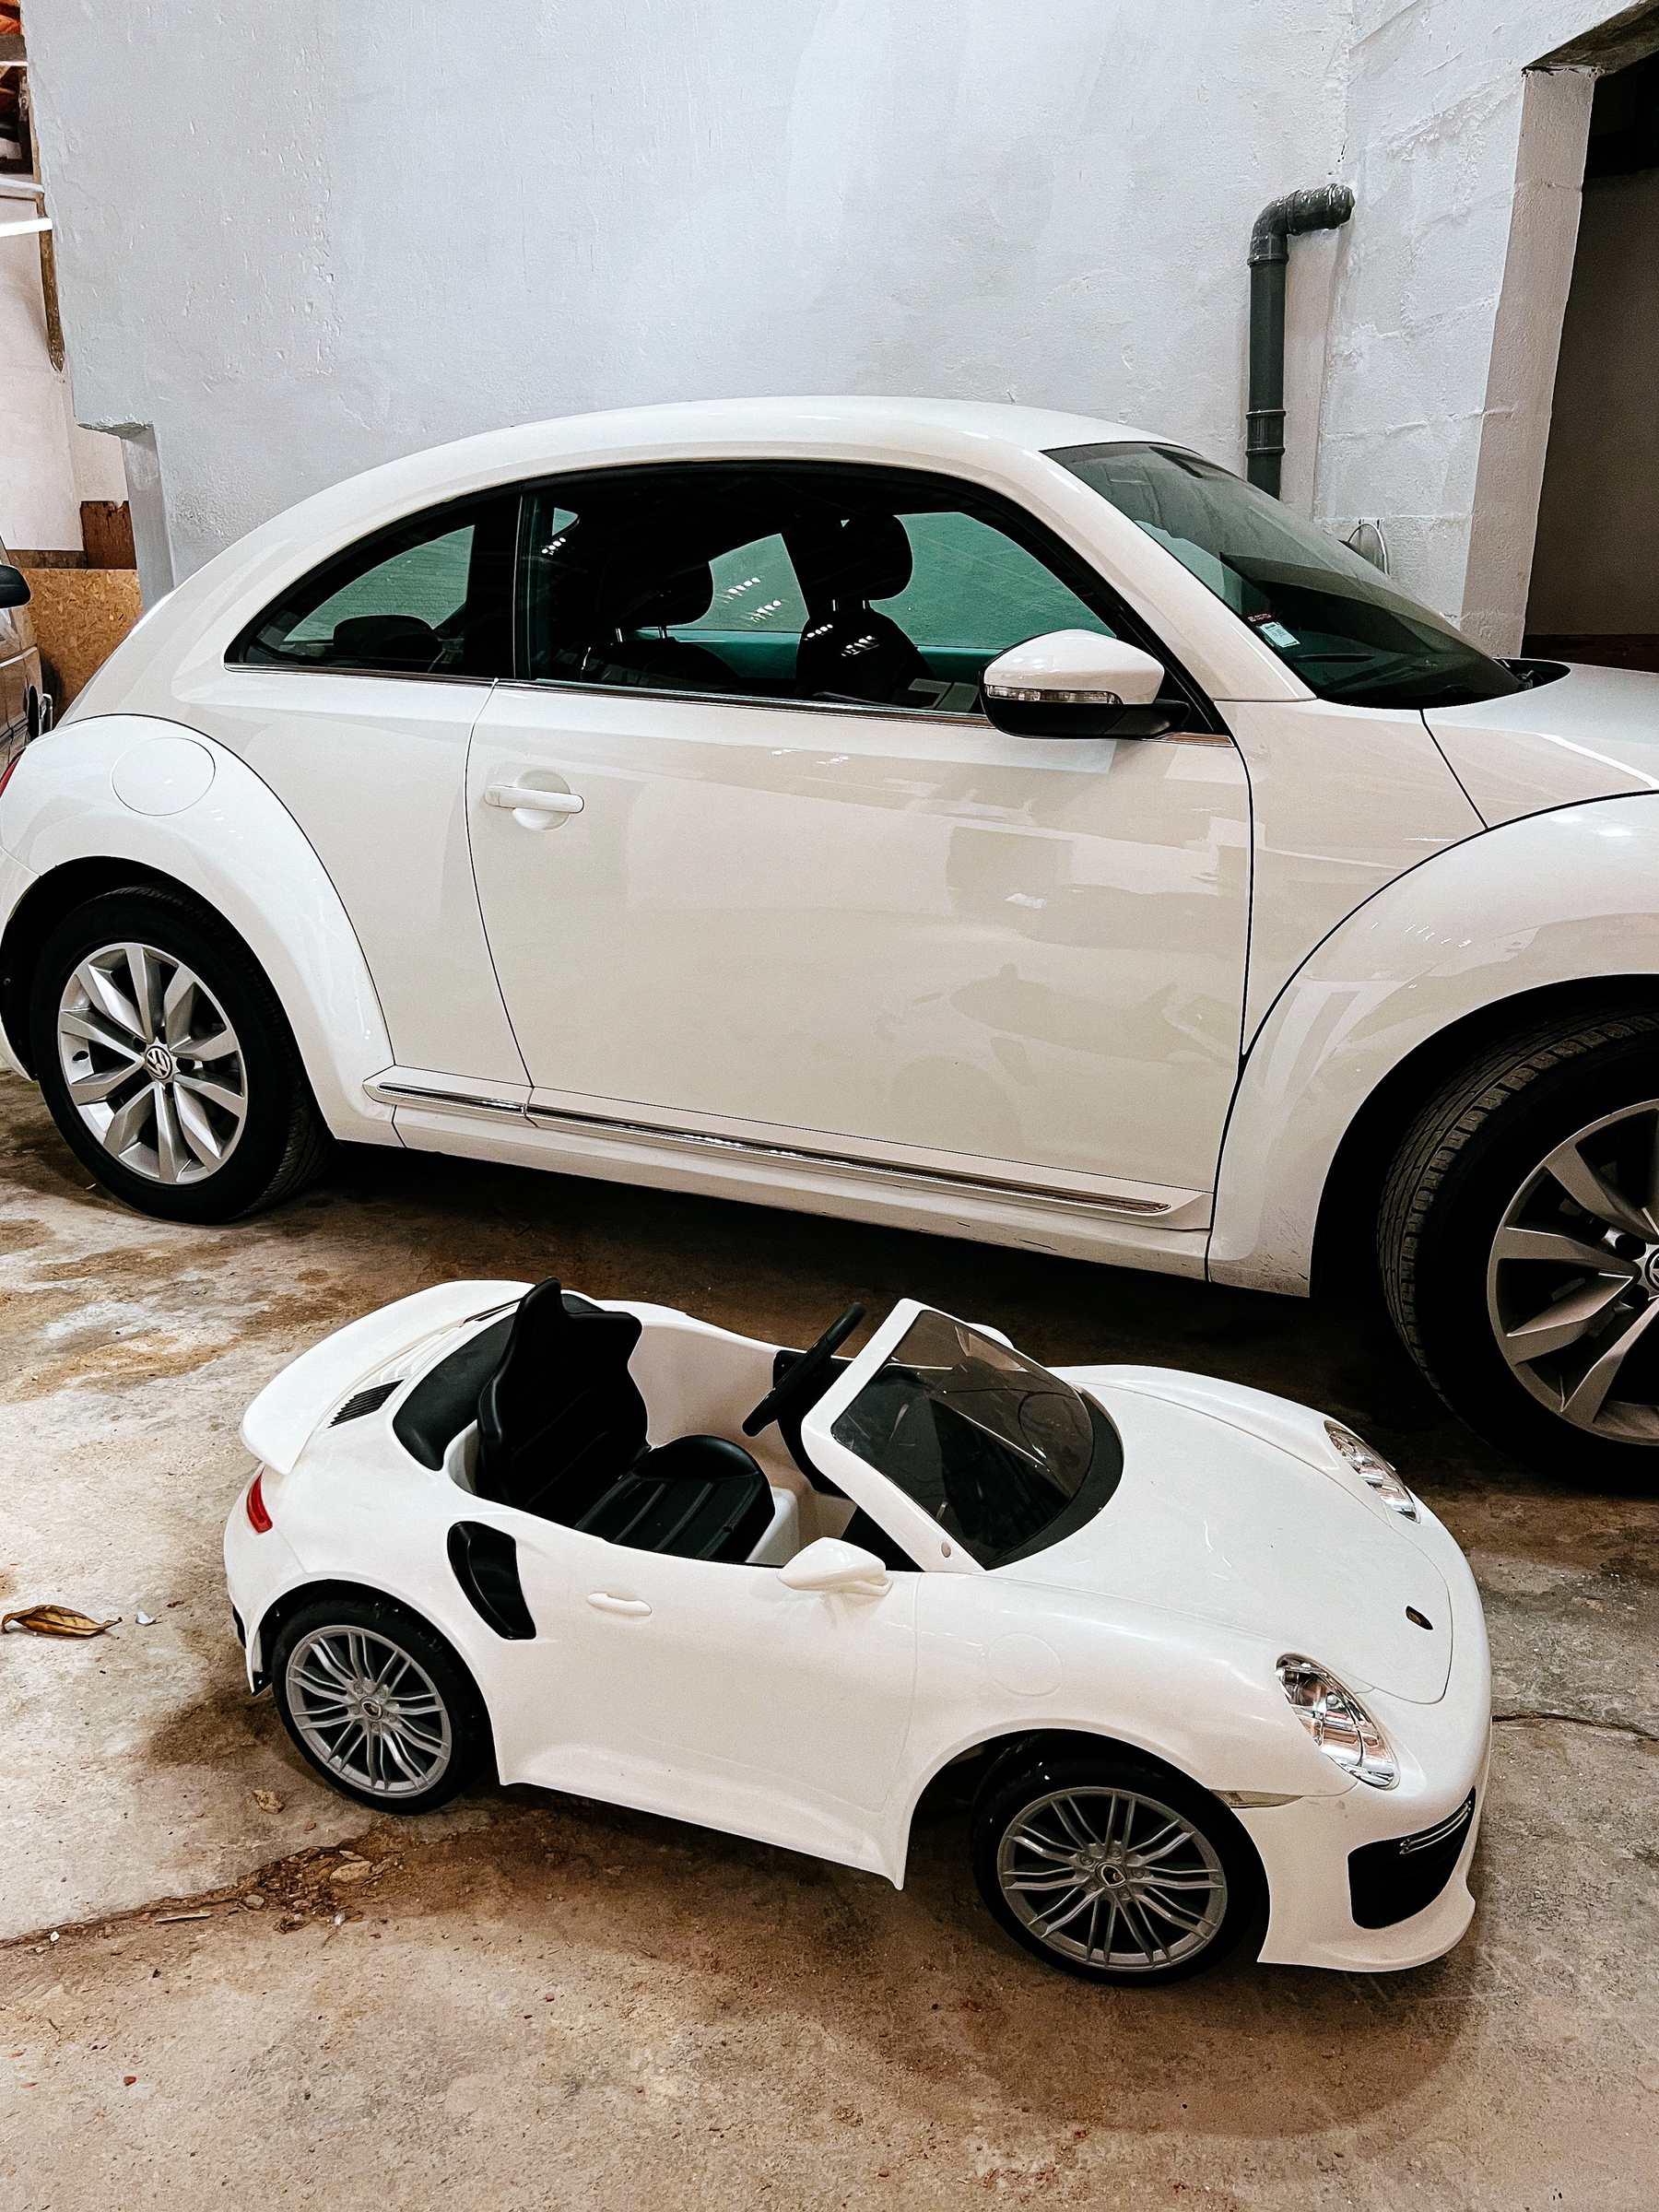 Two white cars. One regular sized, and a much smaller one, fit for a toddler. 